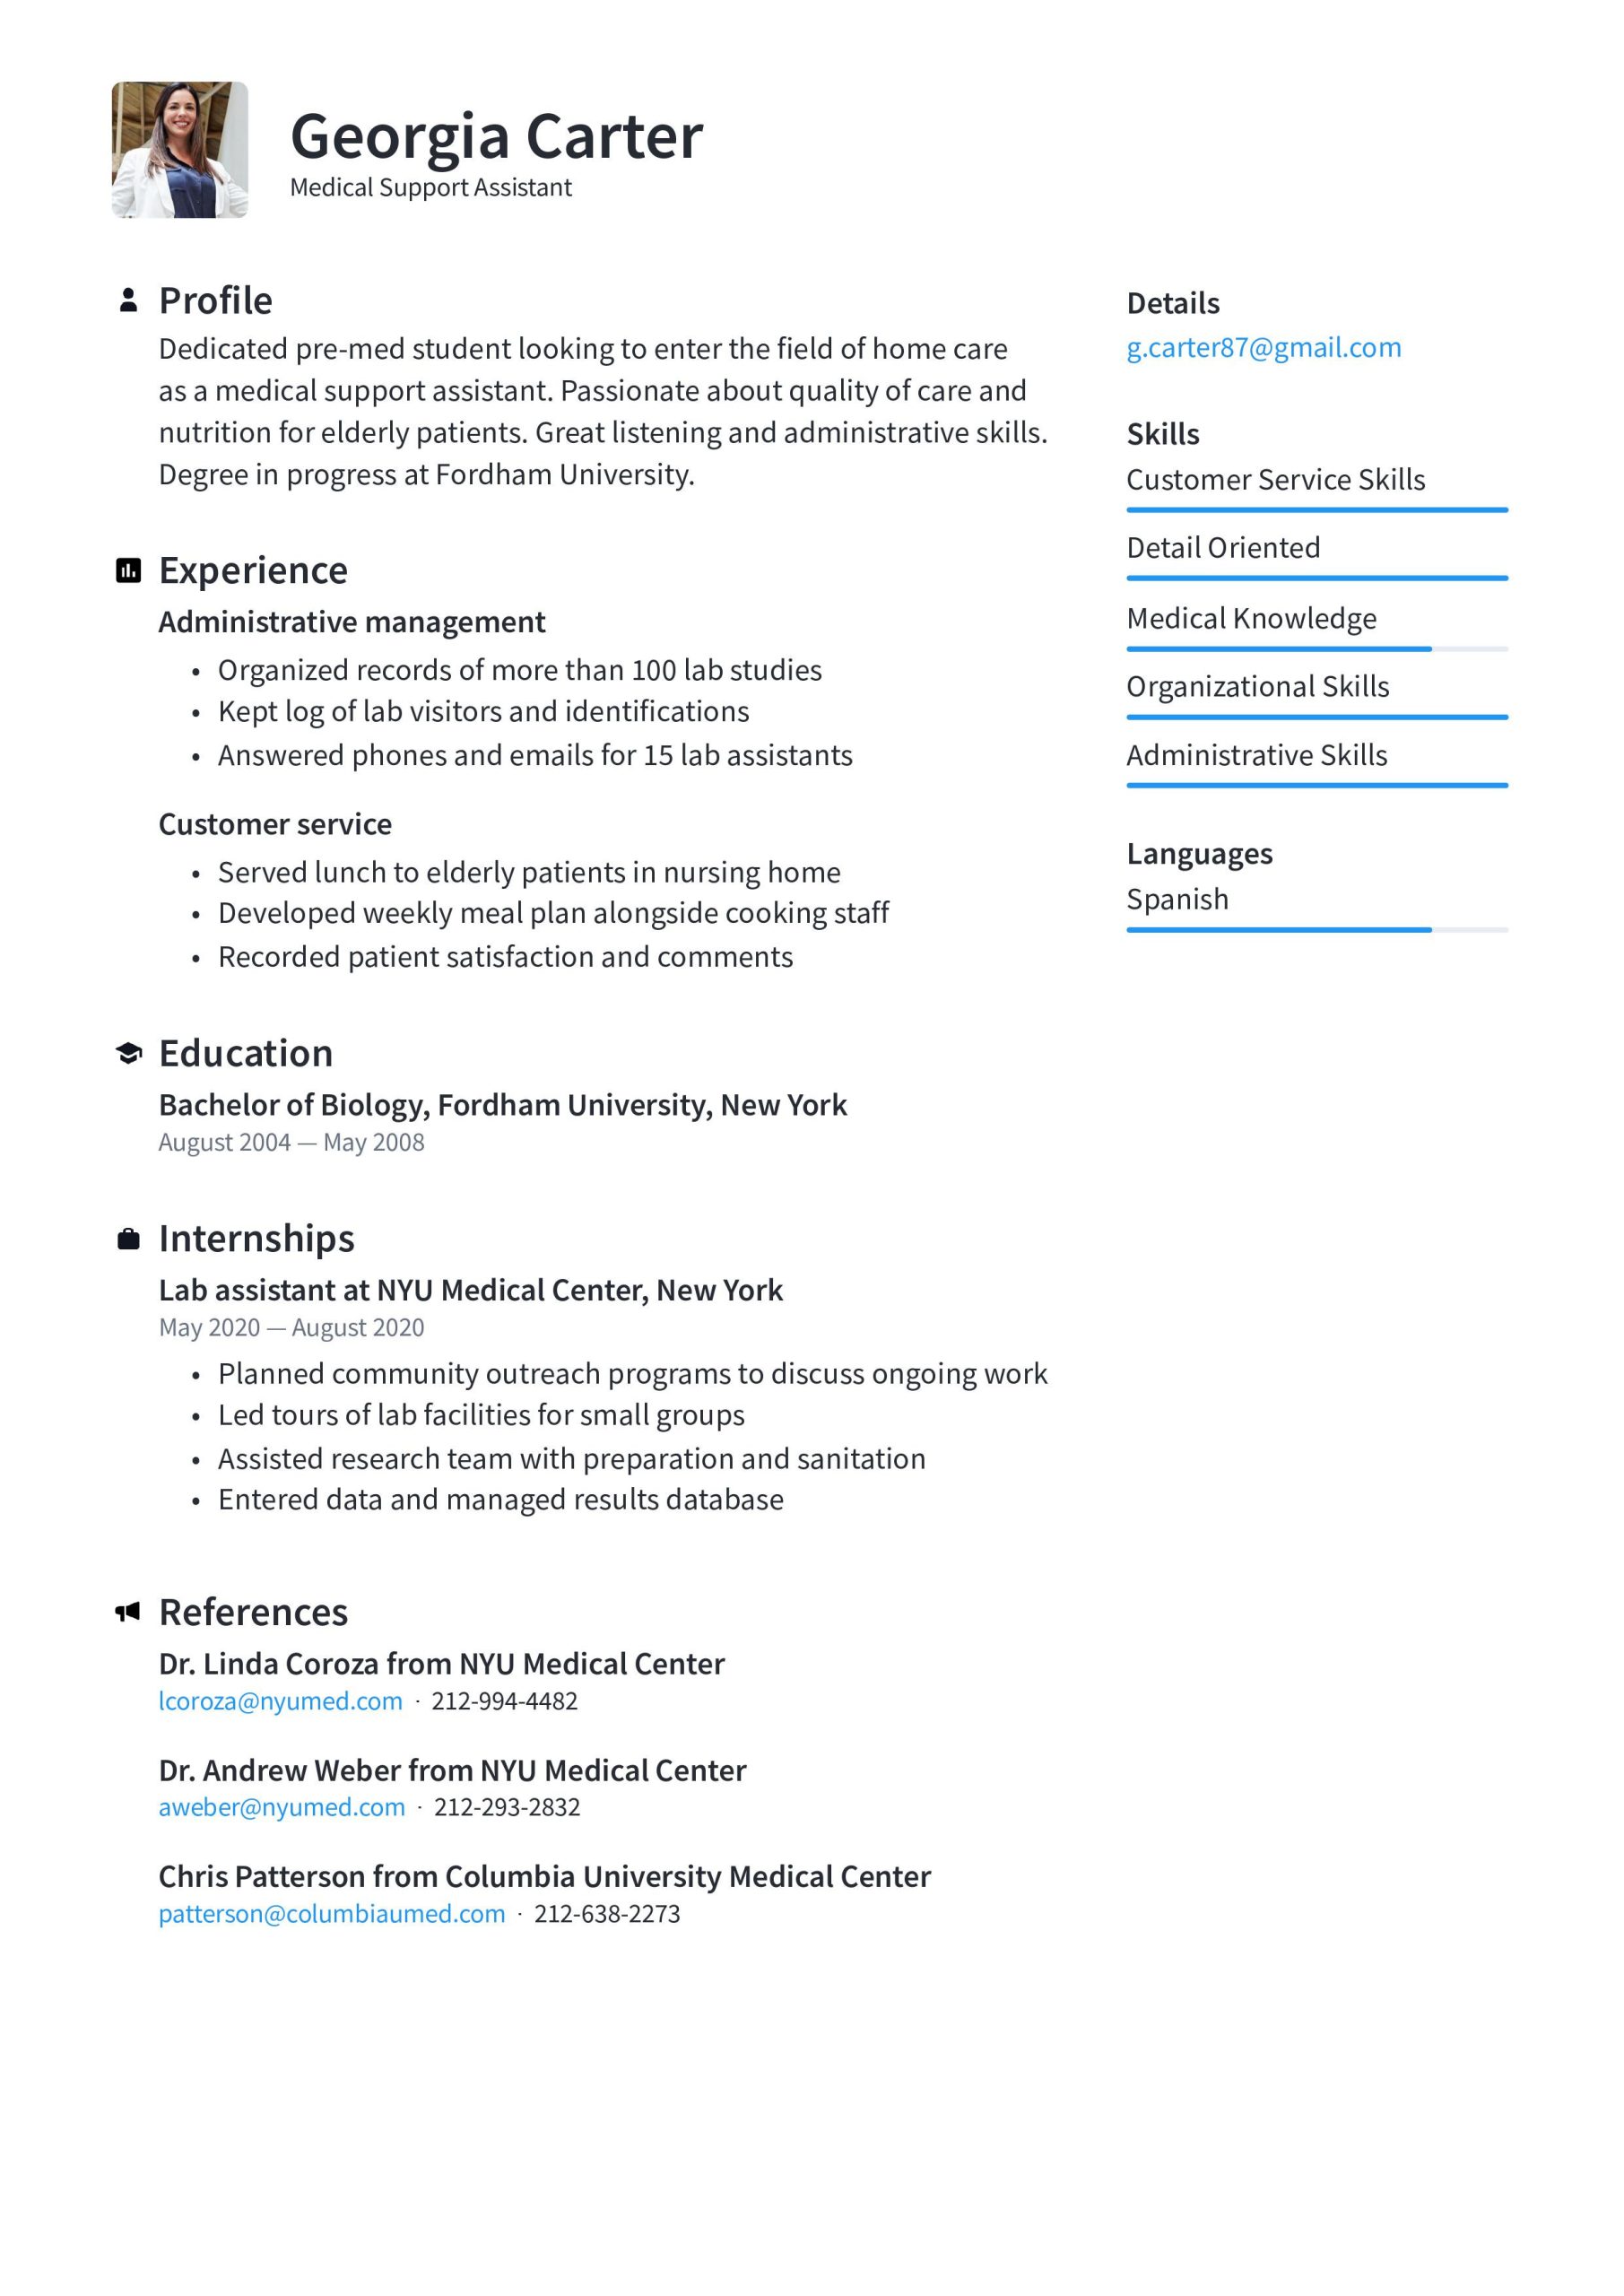 Sample Functional Resume with No Work Experience Functional Resume format: Examples, Tips, & Free Templates